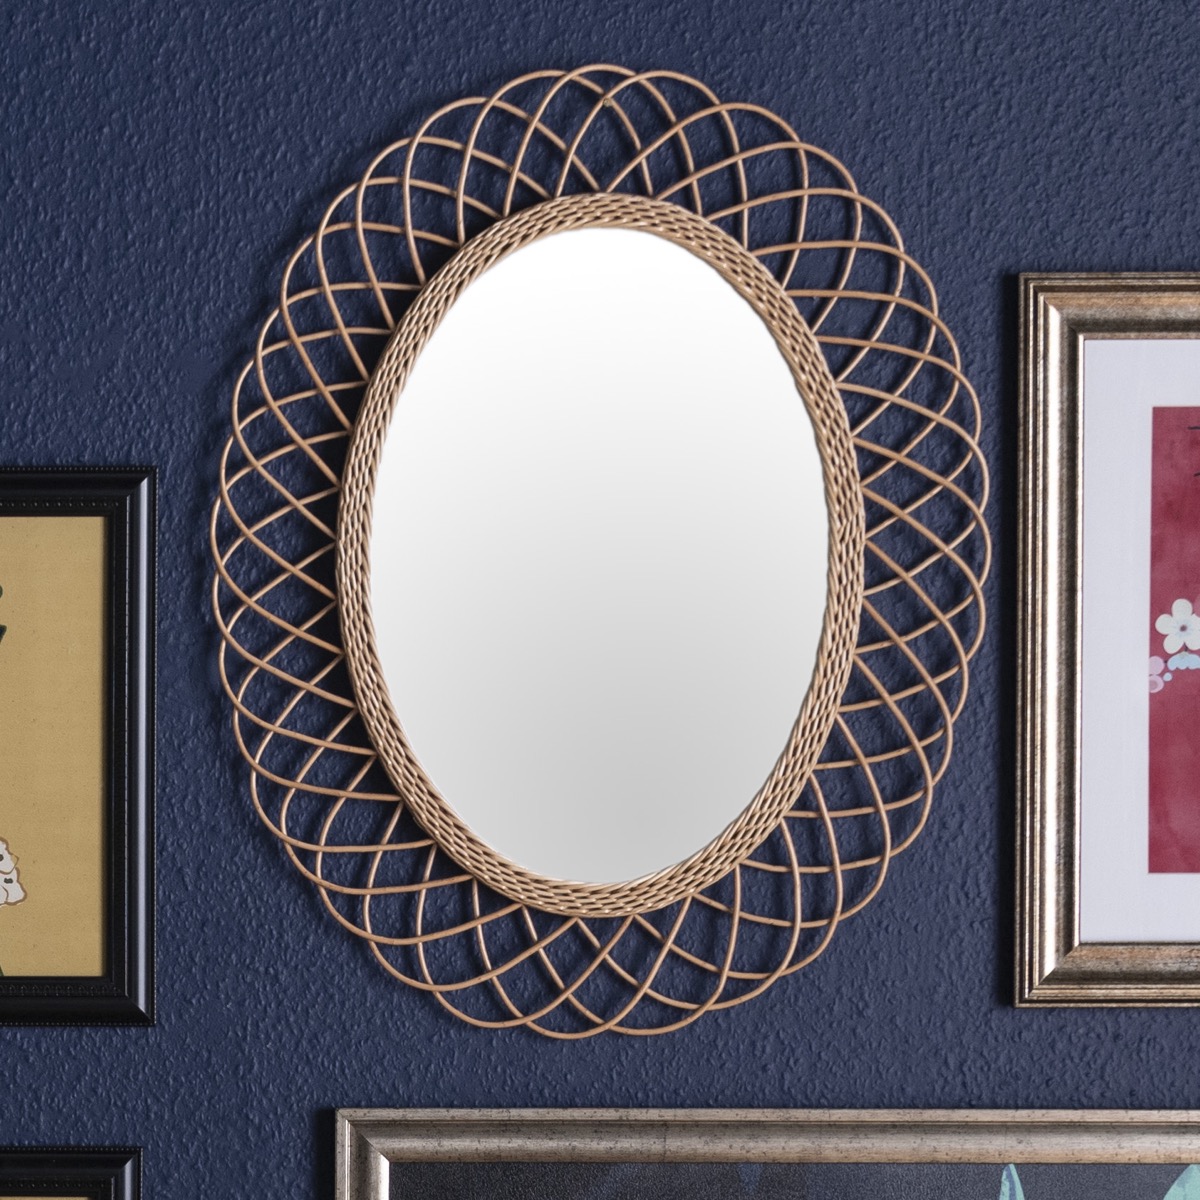 Drew Barrymore Collection rattan mirror on wall